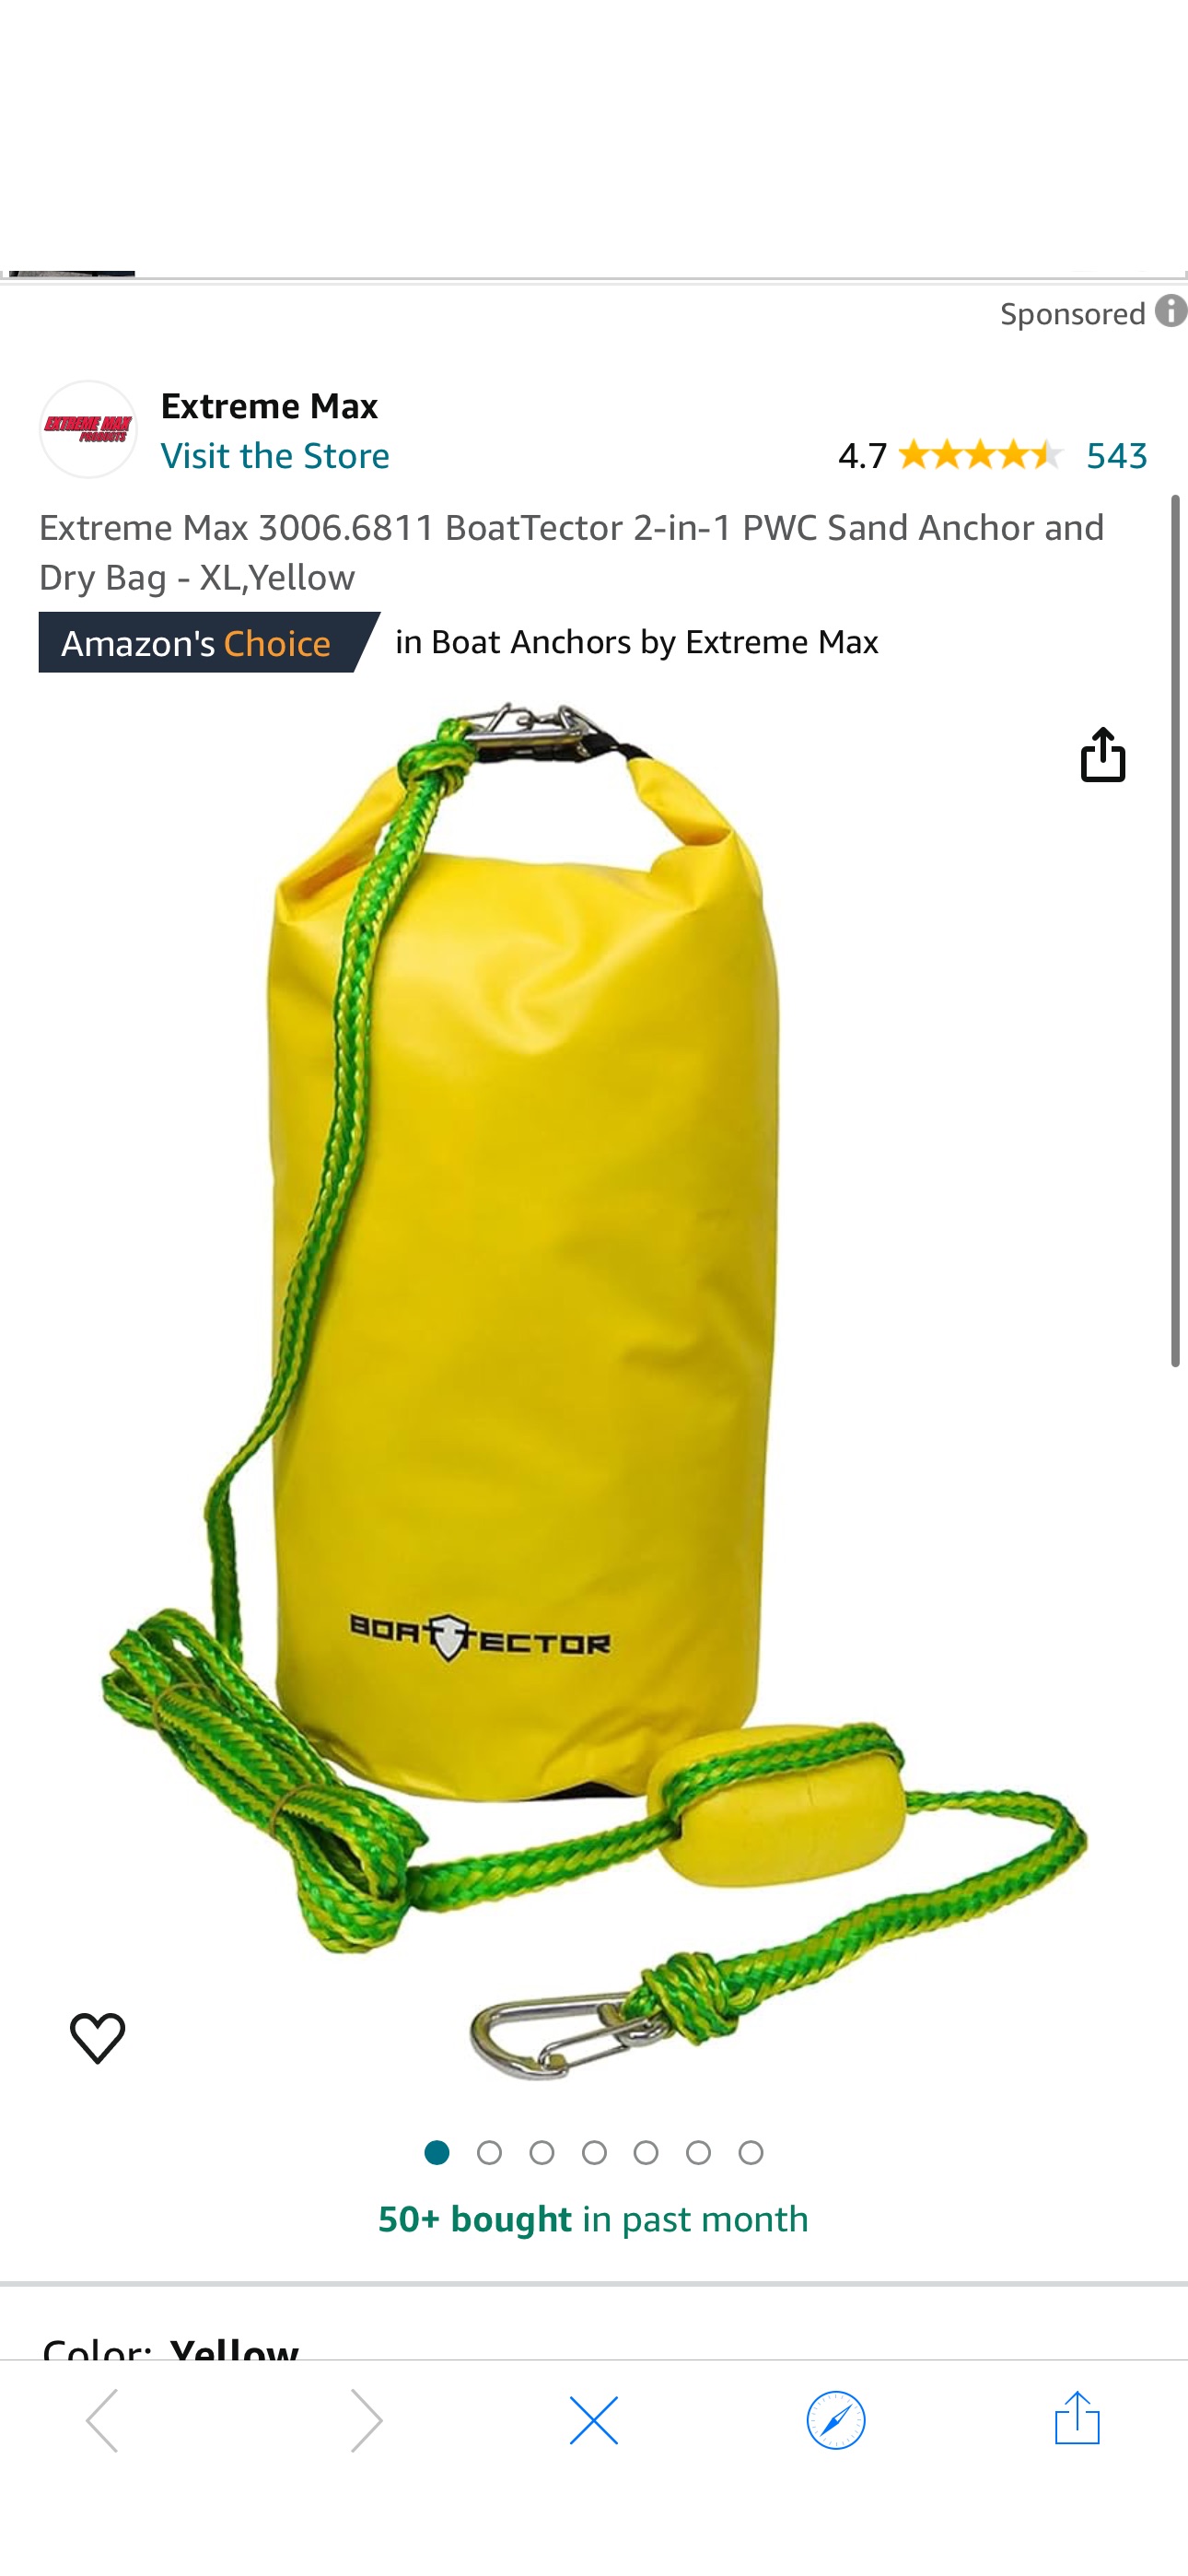 Amazon.com: Extreme Max 3006.6811 BoatTector 2-in-1 PWC Sand Anchor and Dry Bag - XL,Yellow : Automotive